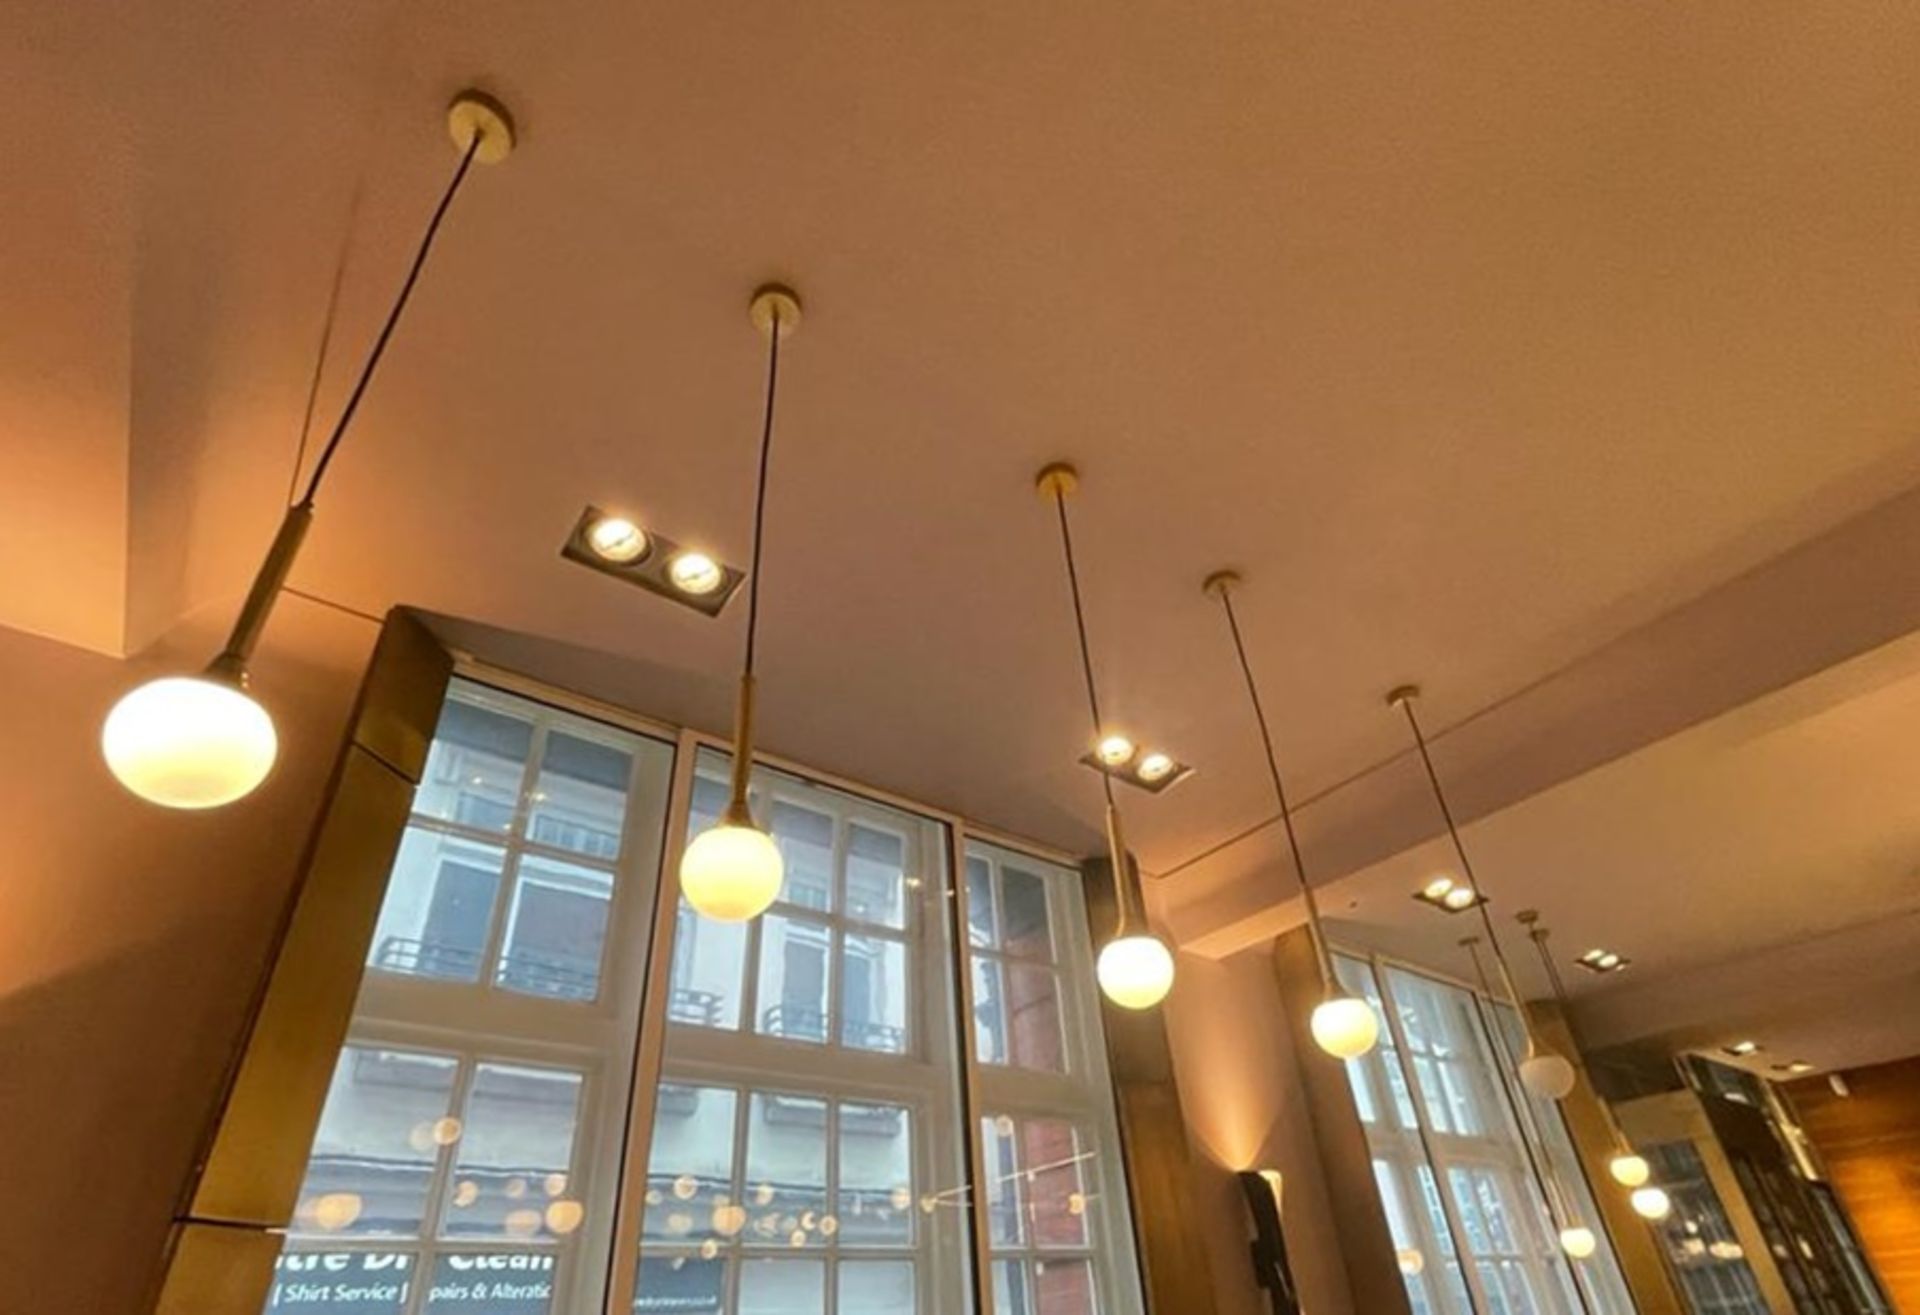 4 x Hand Made 'Petite' Suspension LED Ceiling Lights By Delight Lighting - Image 8 of 12